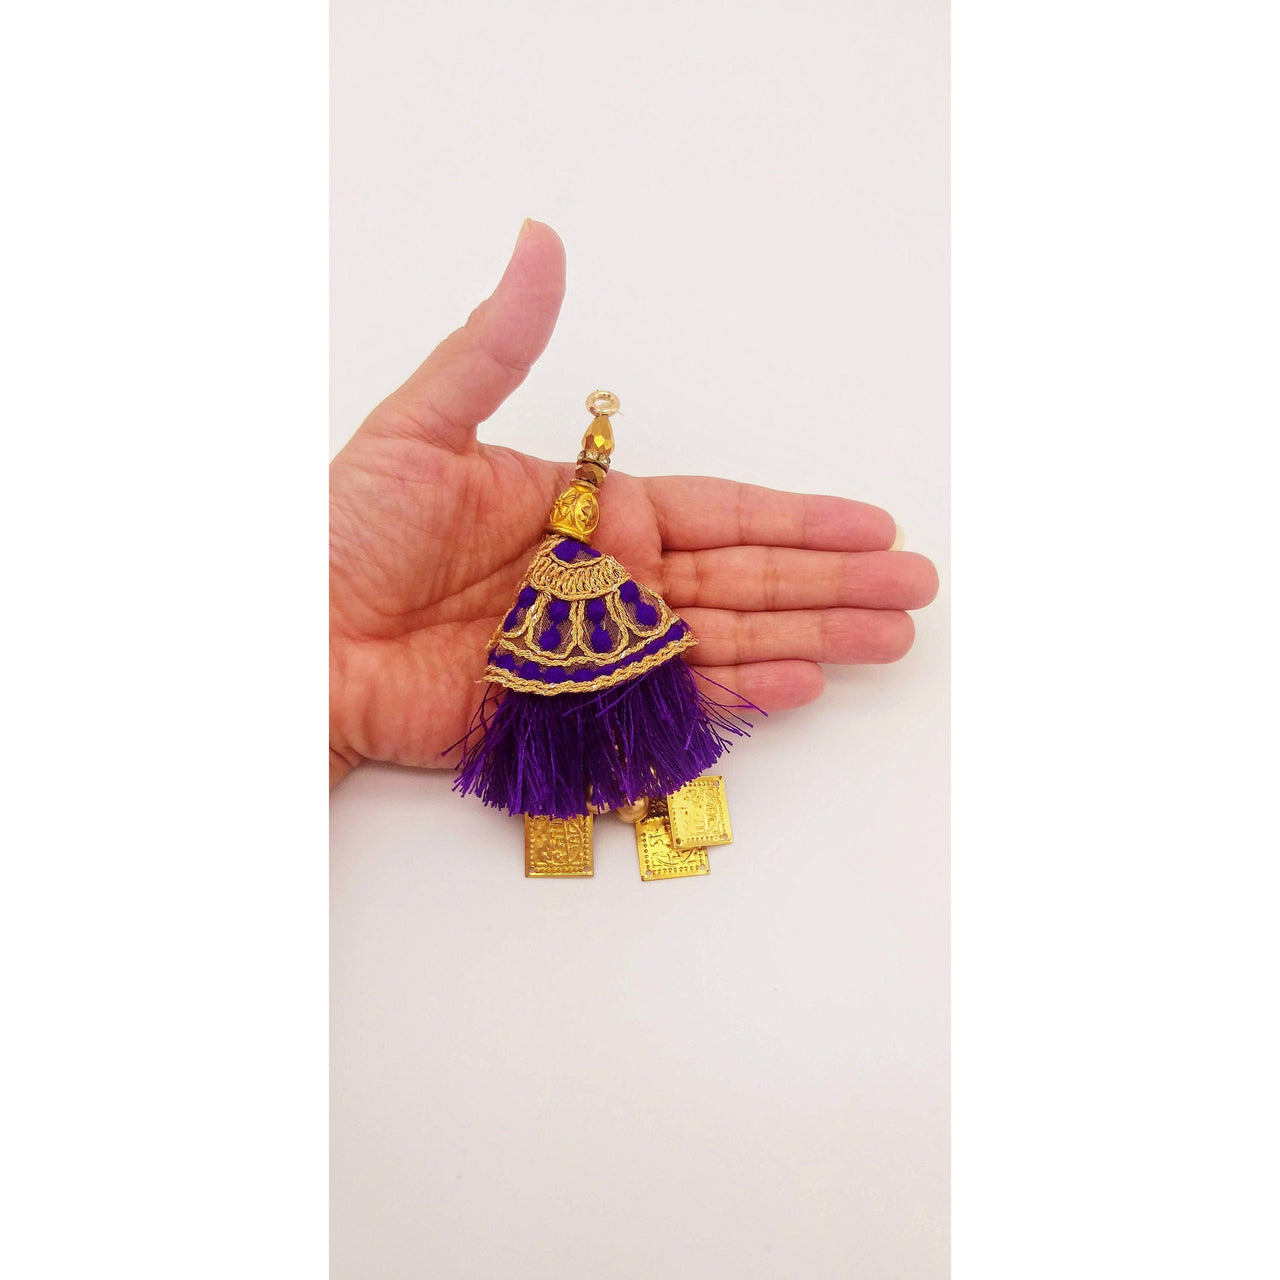 Violet Tassels With Gold Beads, Beaded Tassels With Violet and Gold Embroidery, Traditional Indian Latkan